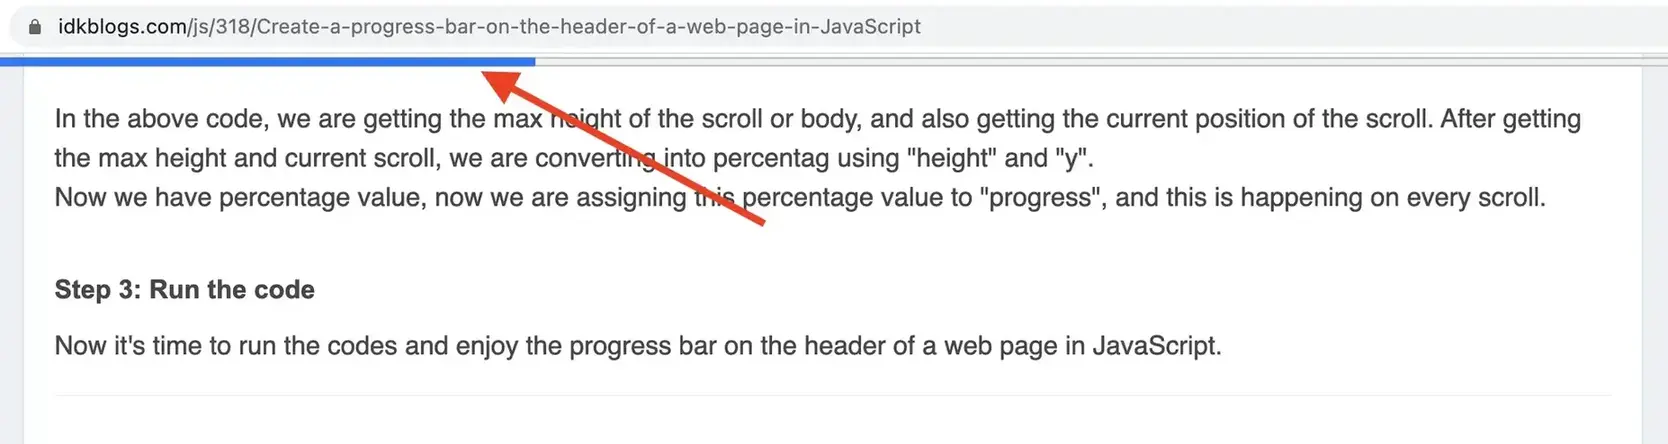 Create a progress bar on the header of a web page in JavaScript